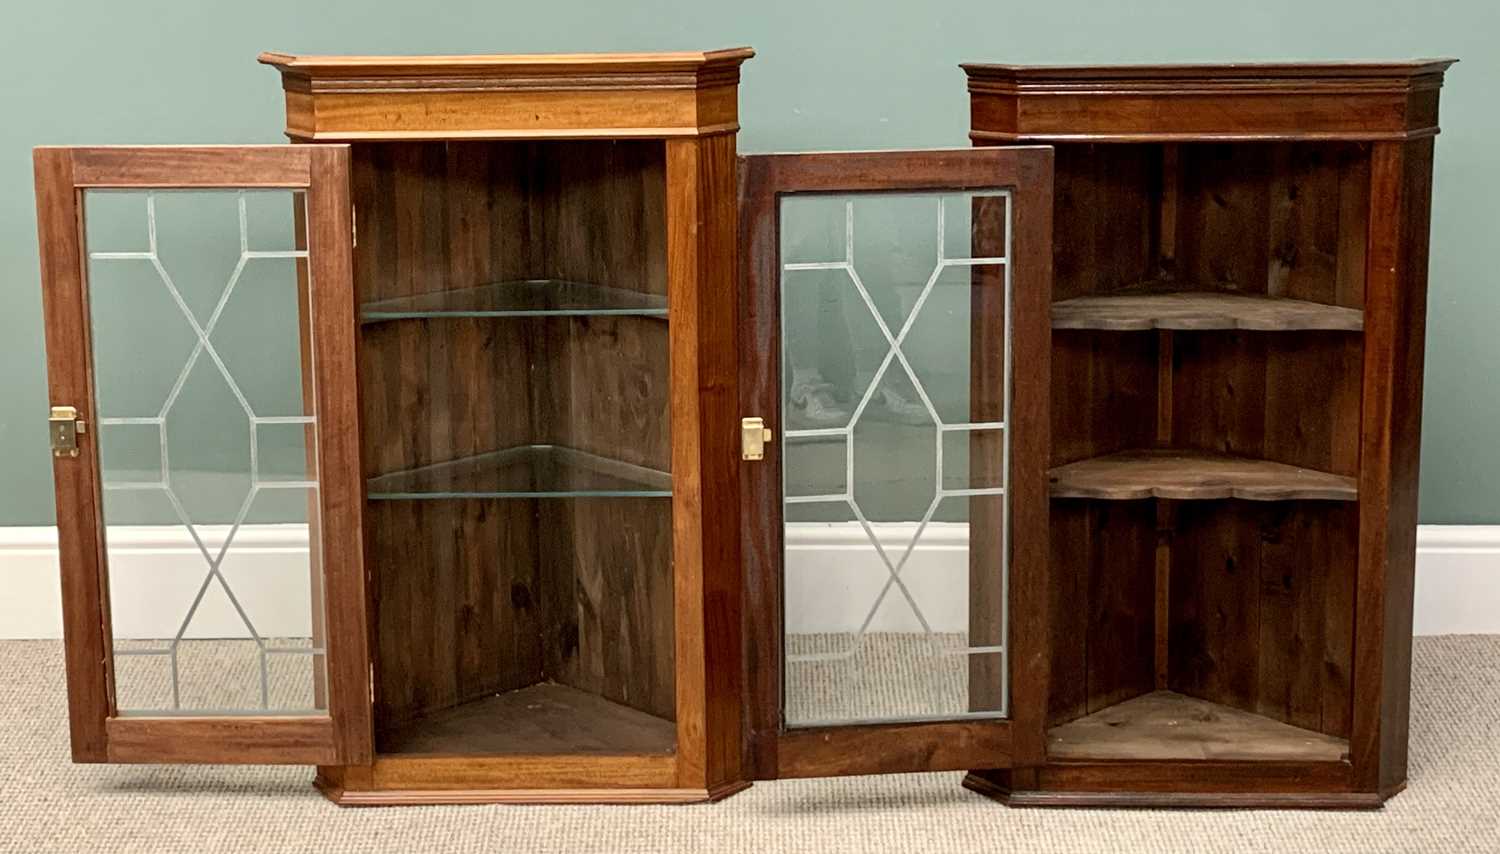 VINTAGE MAHOGANY WALL HANGING CABINETS - two similar with astragal leaded glass single doors, - Image 2 of 3